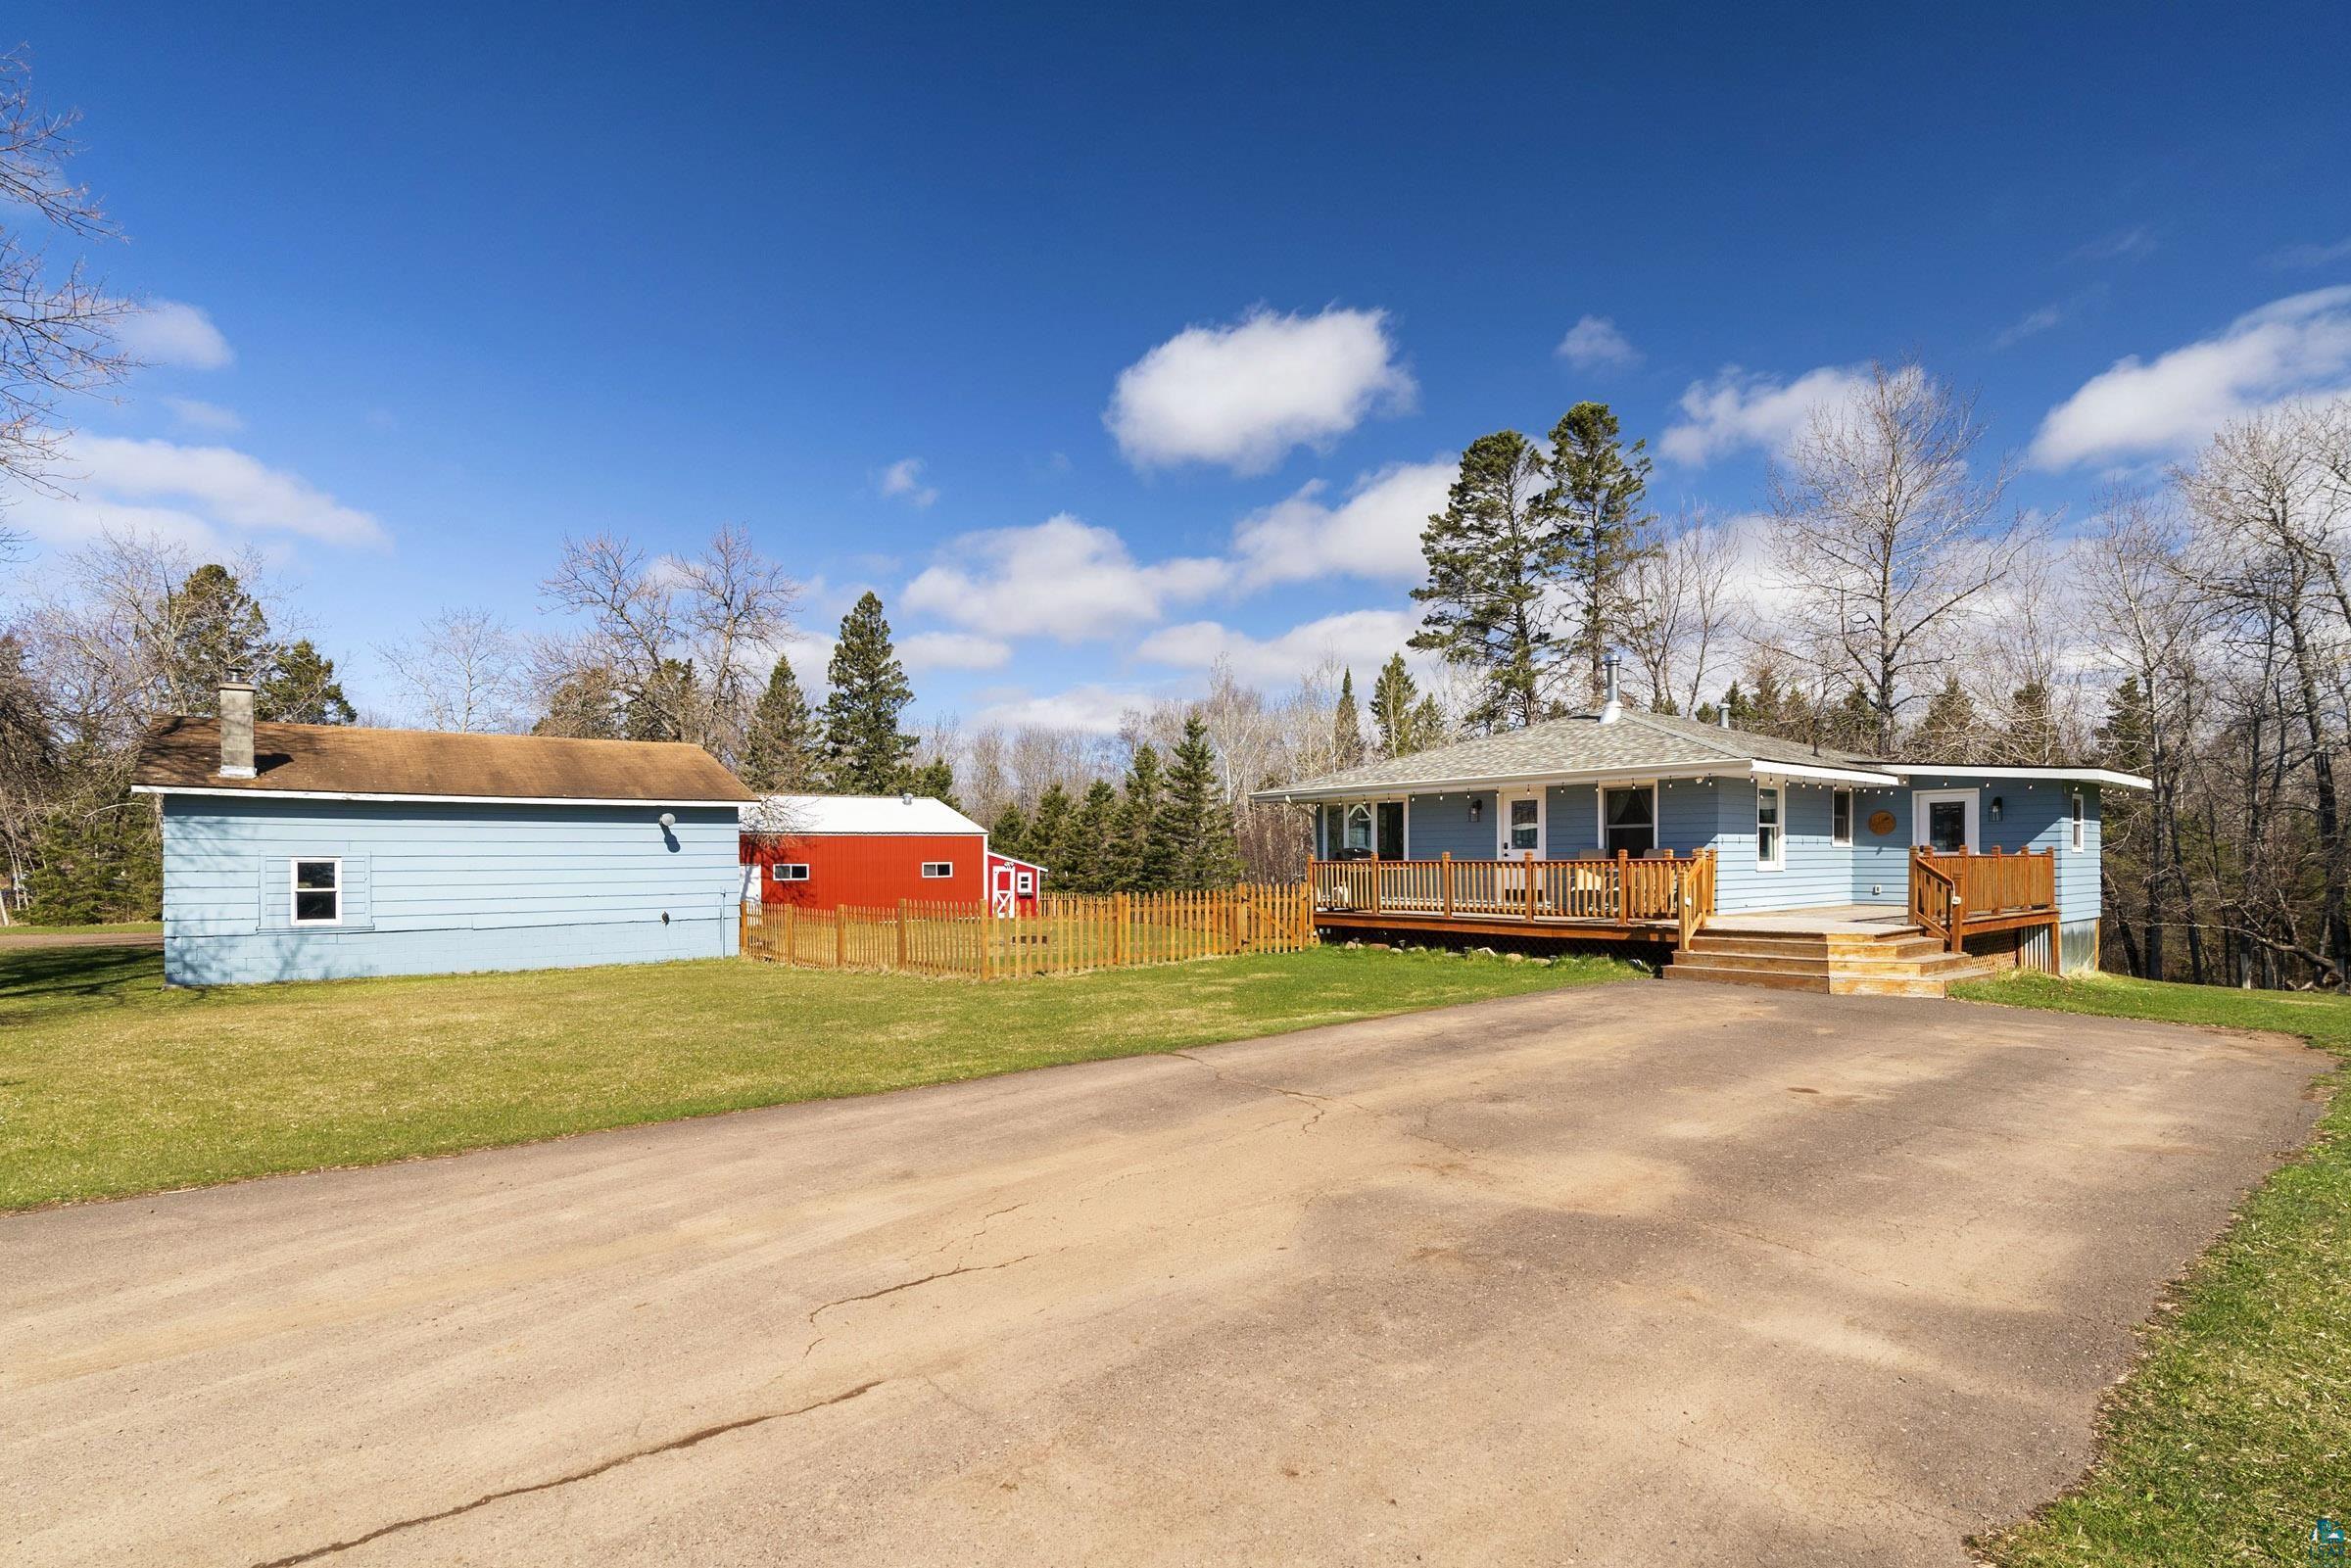 151 Coolidge Rd, Knife River, MN 55609 Listing Photo  1